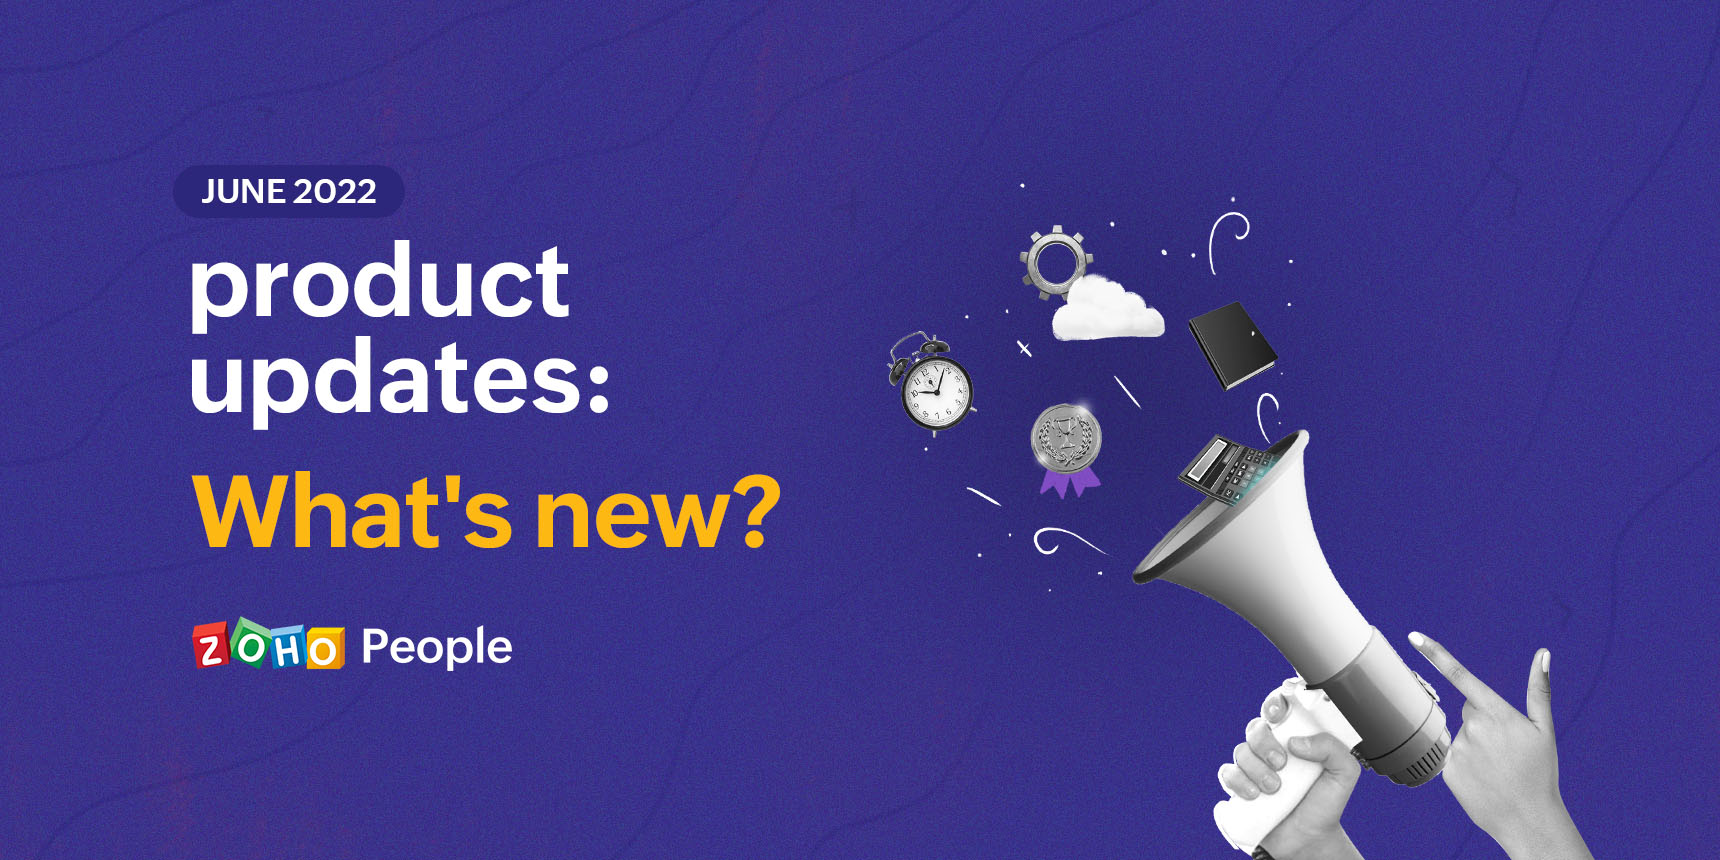 Zoho People Product updates: June 2022